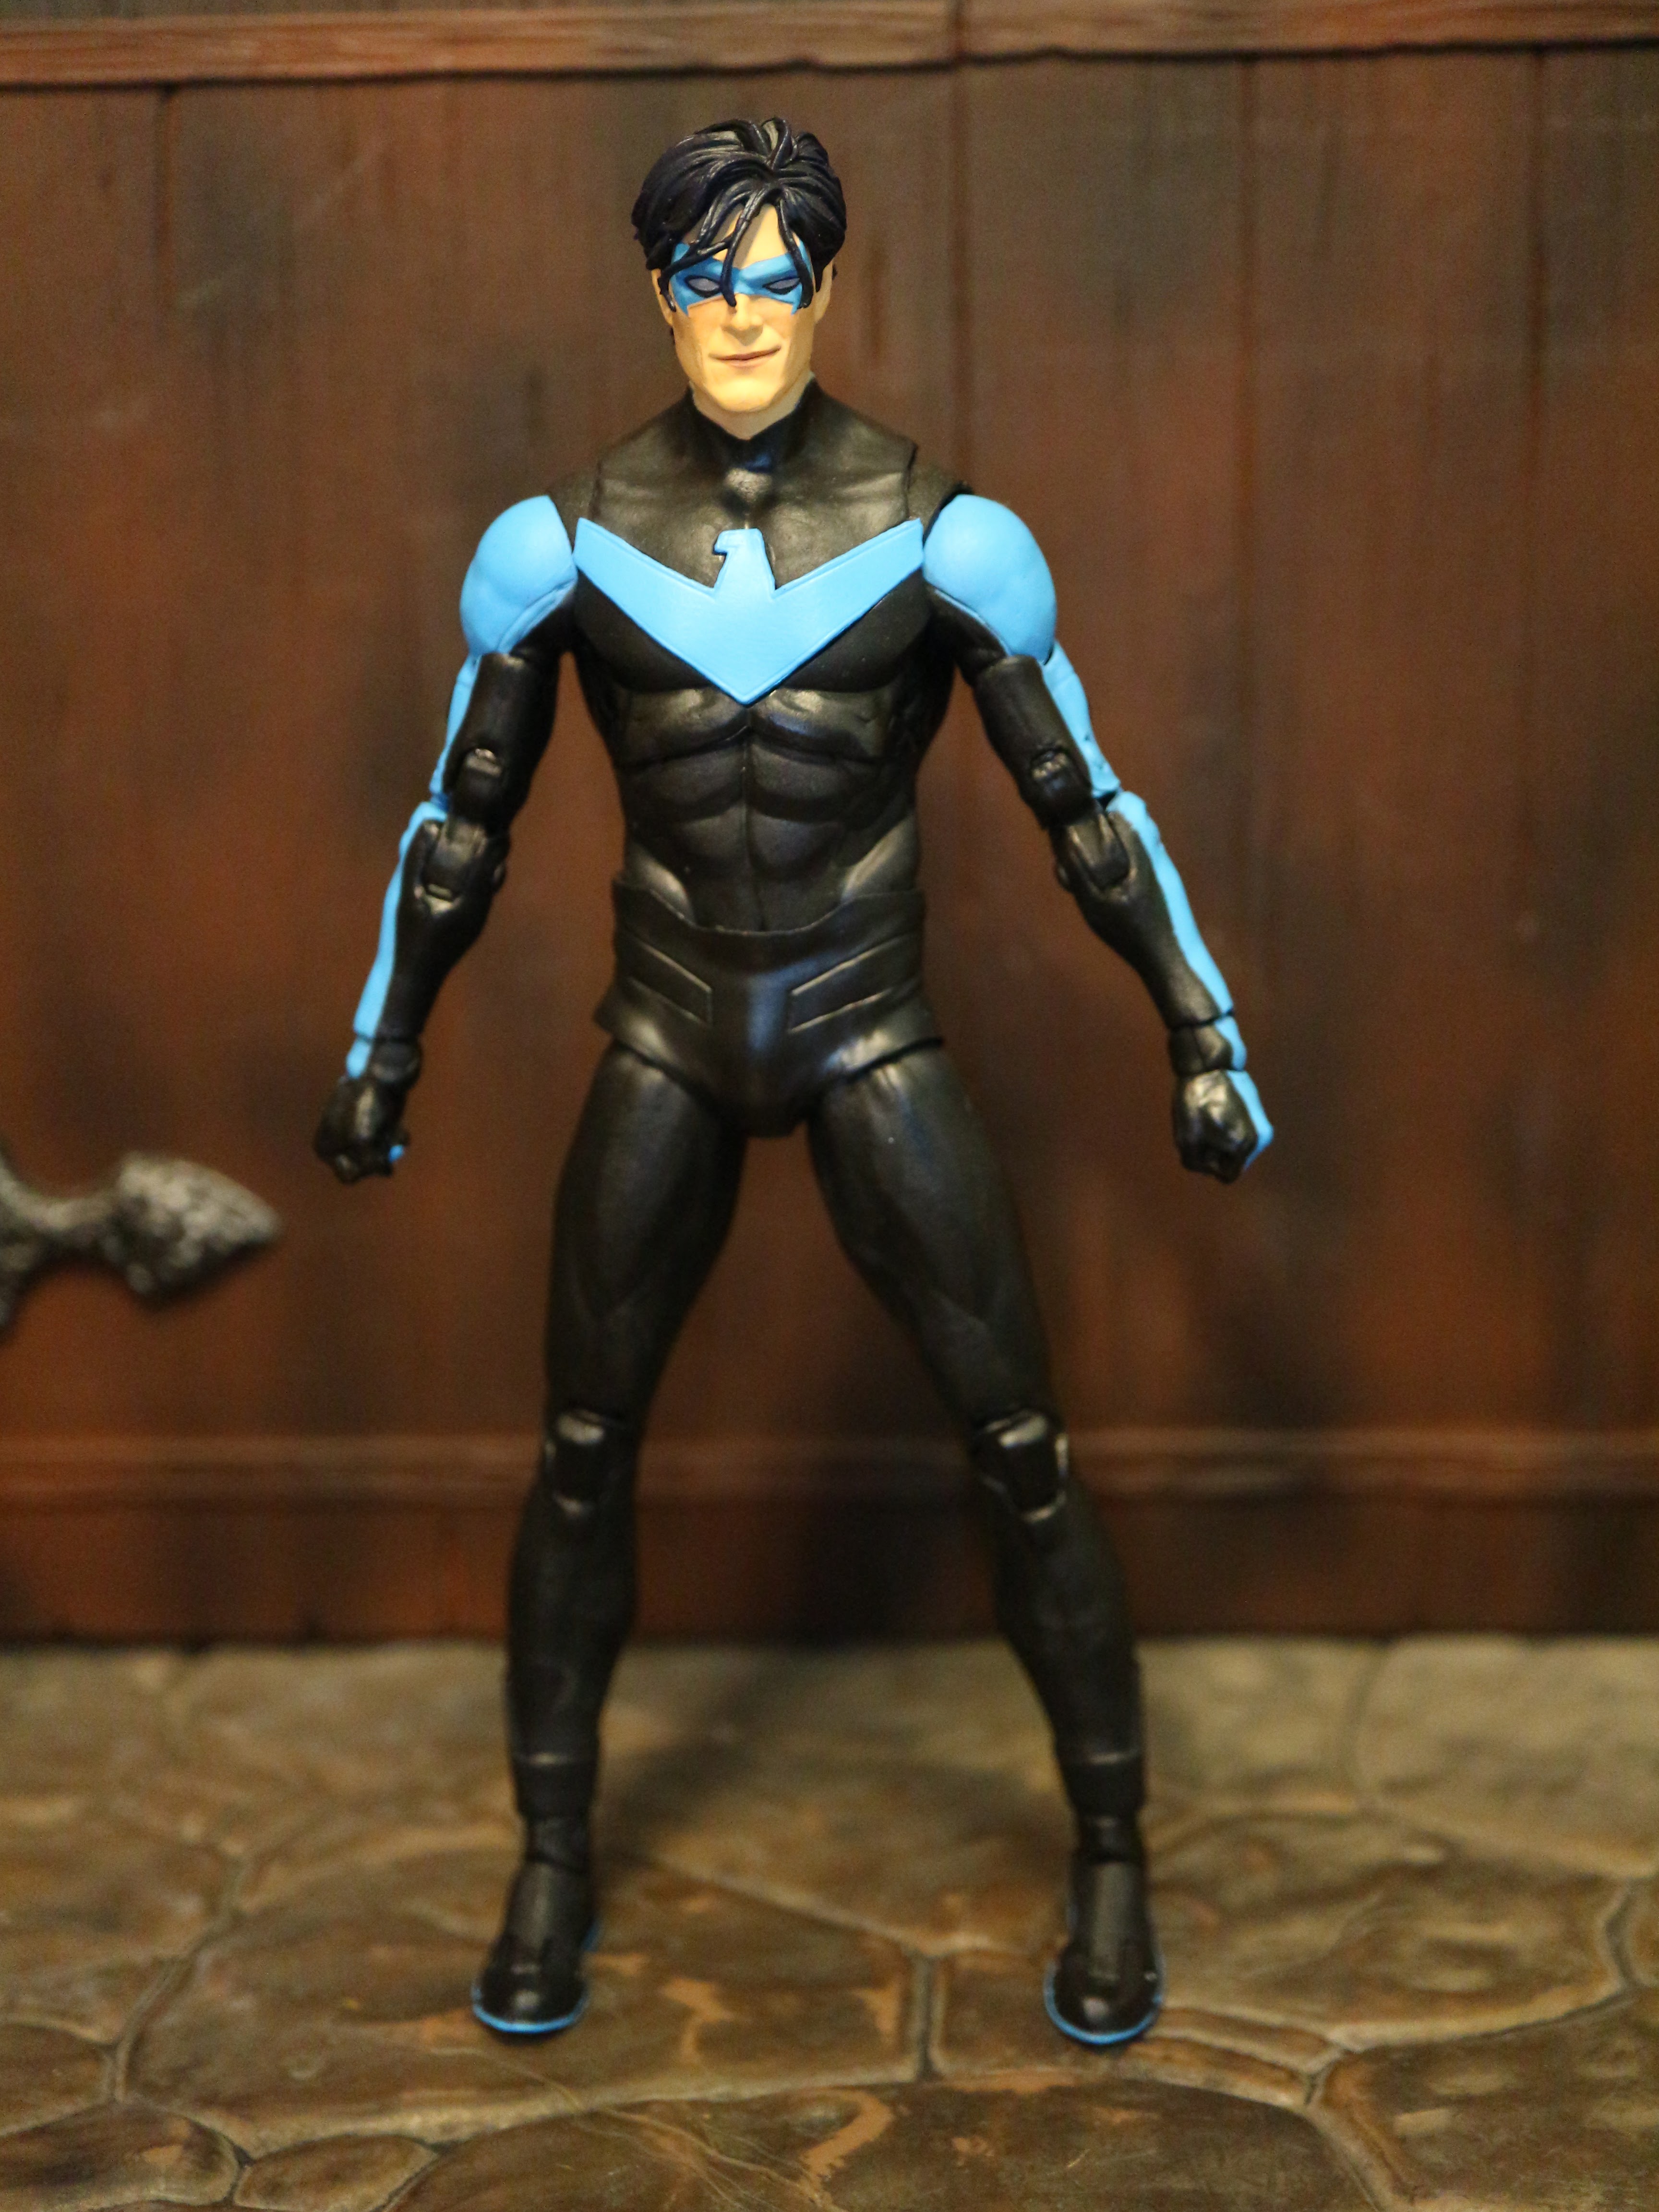 McFarlane Toys DC Multiverse Gotham Knights Nightwing - 7 in Collectible  Figure 